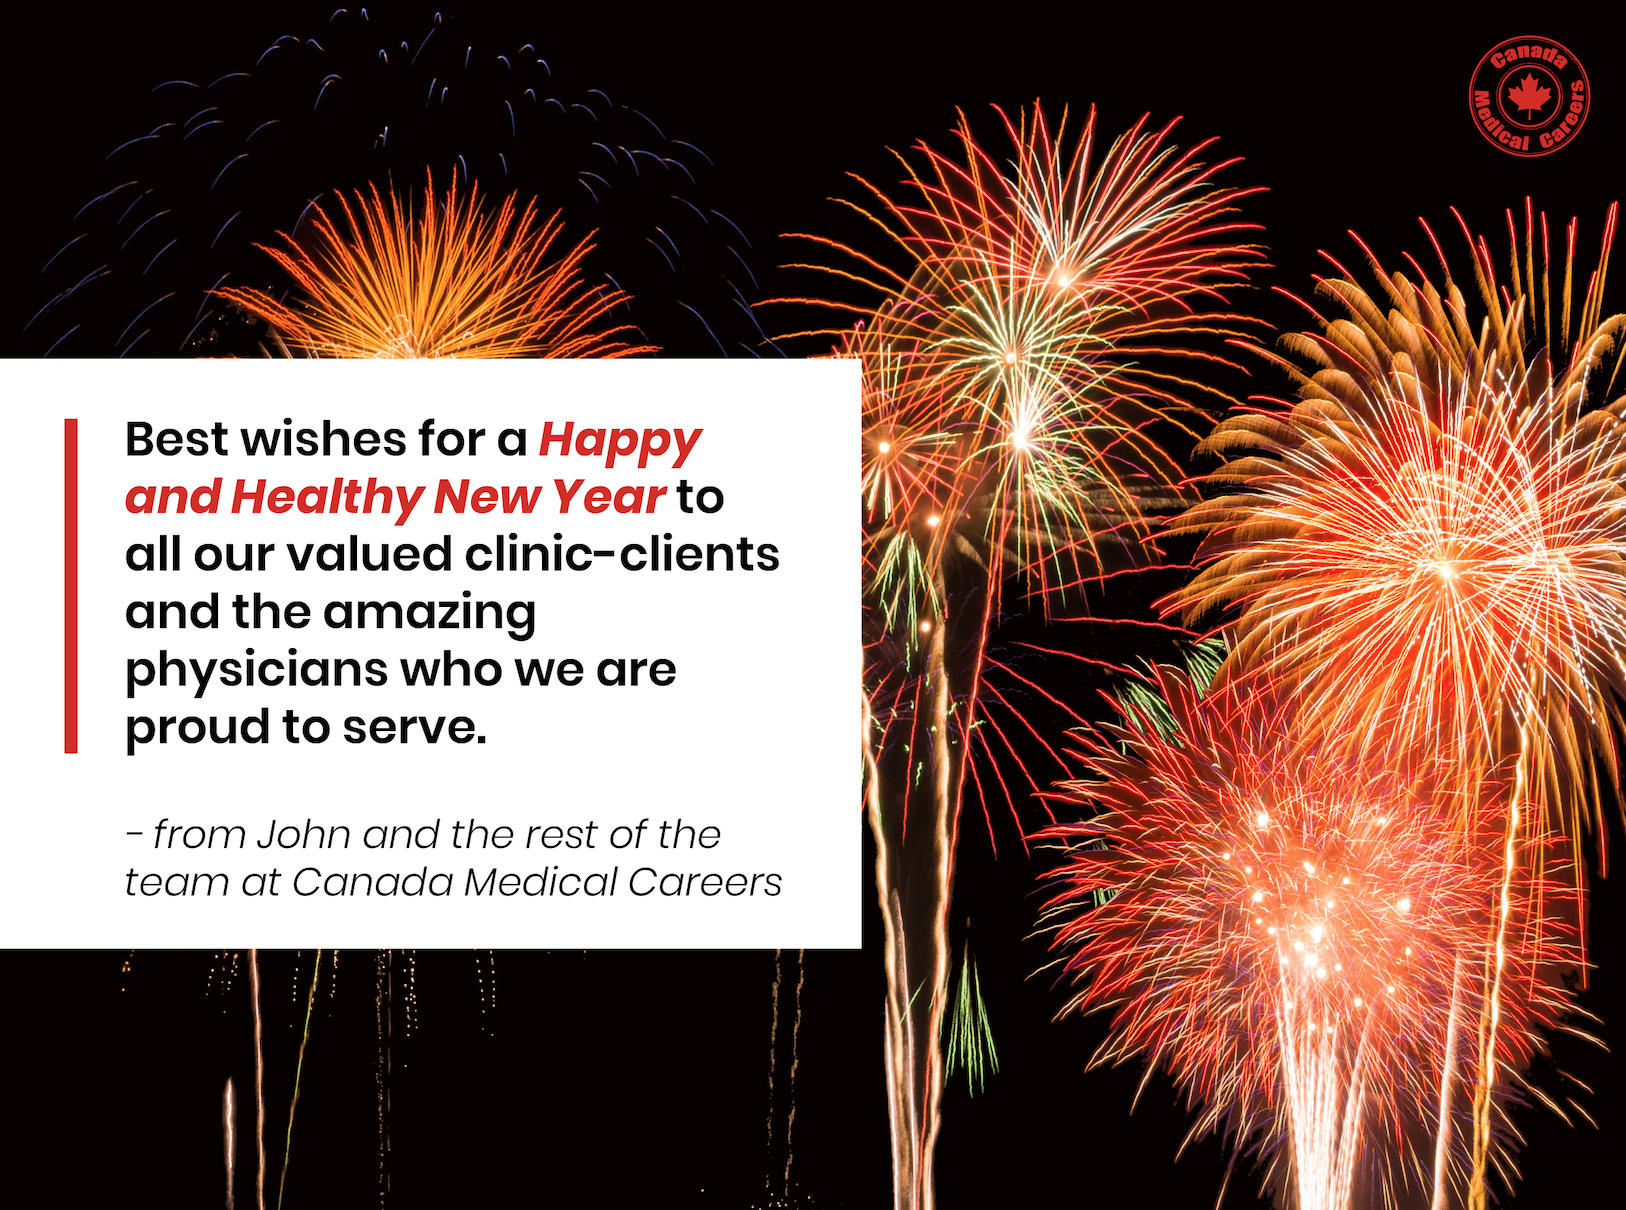 Canada Medical Careers' New Year's Message